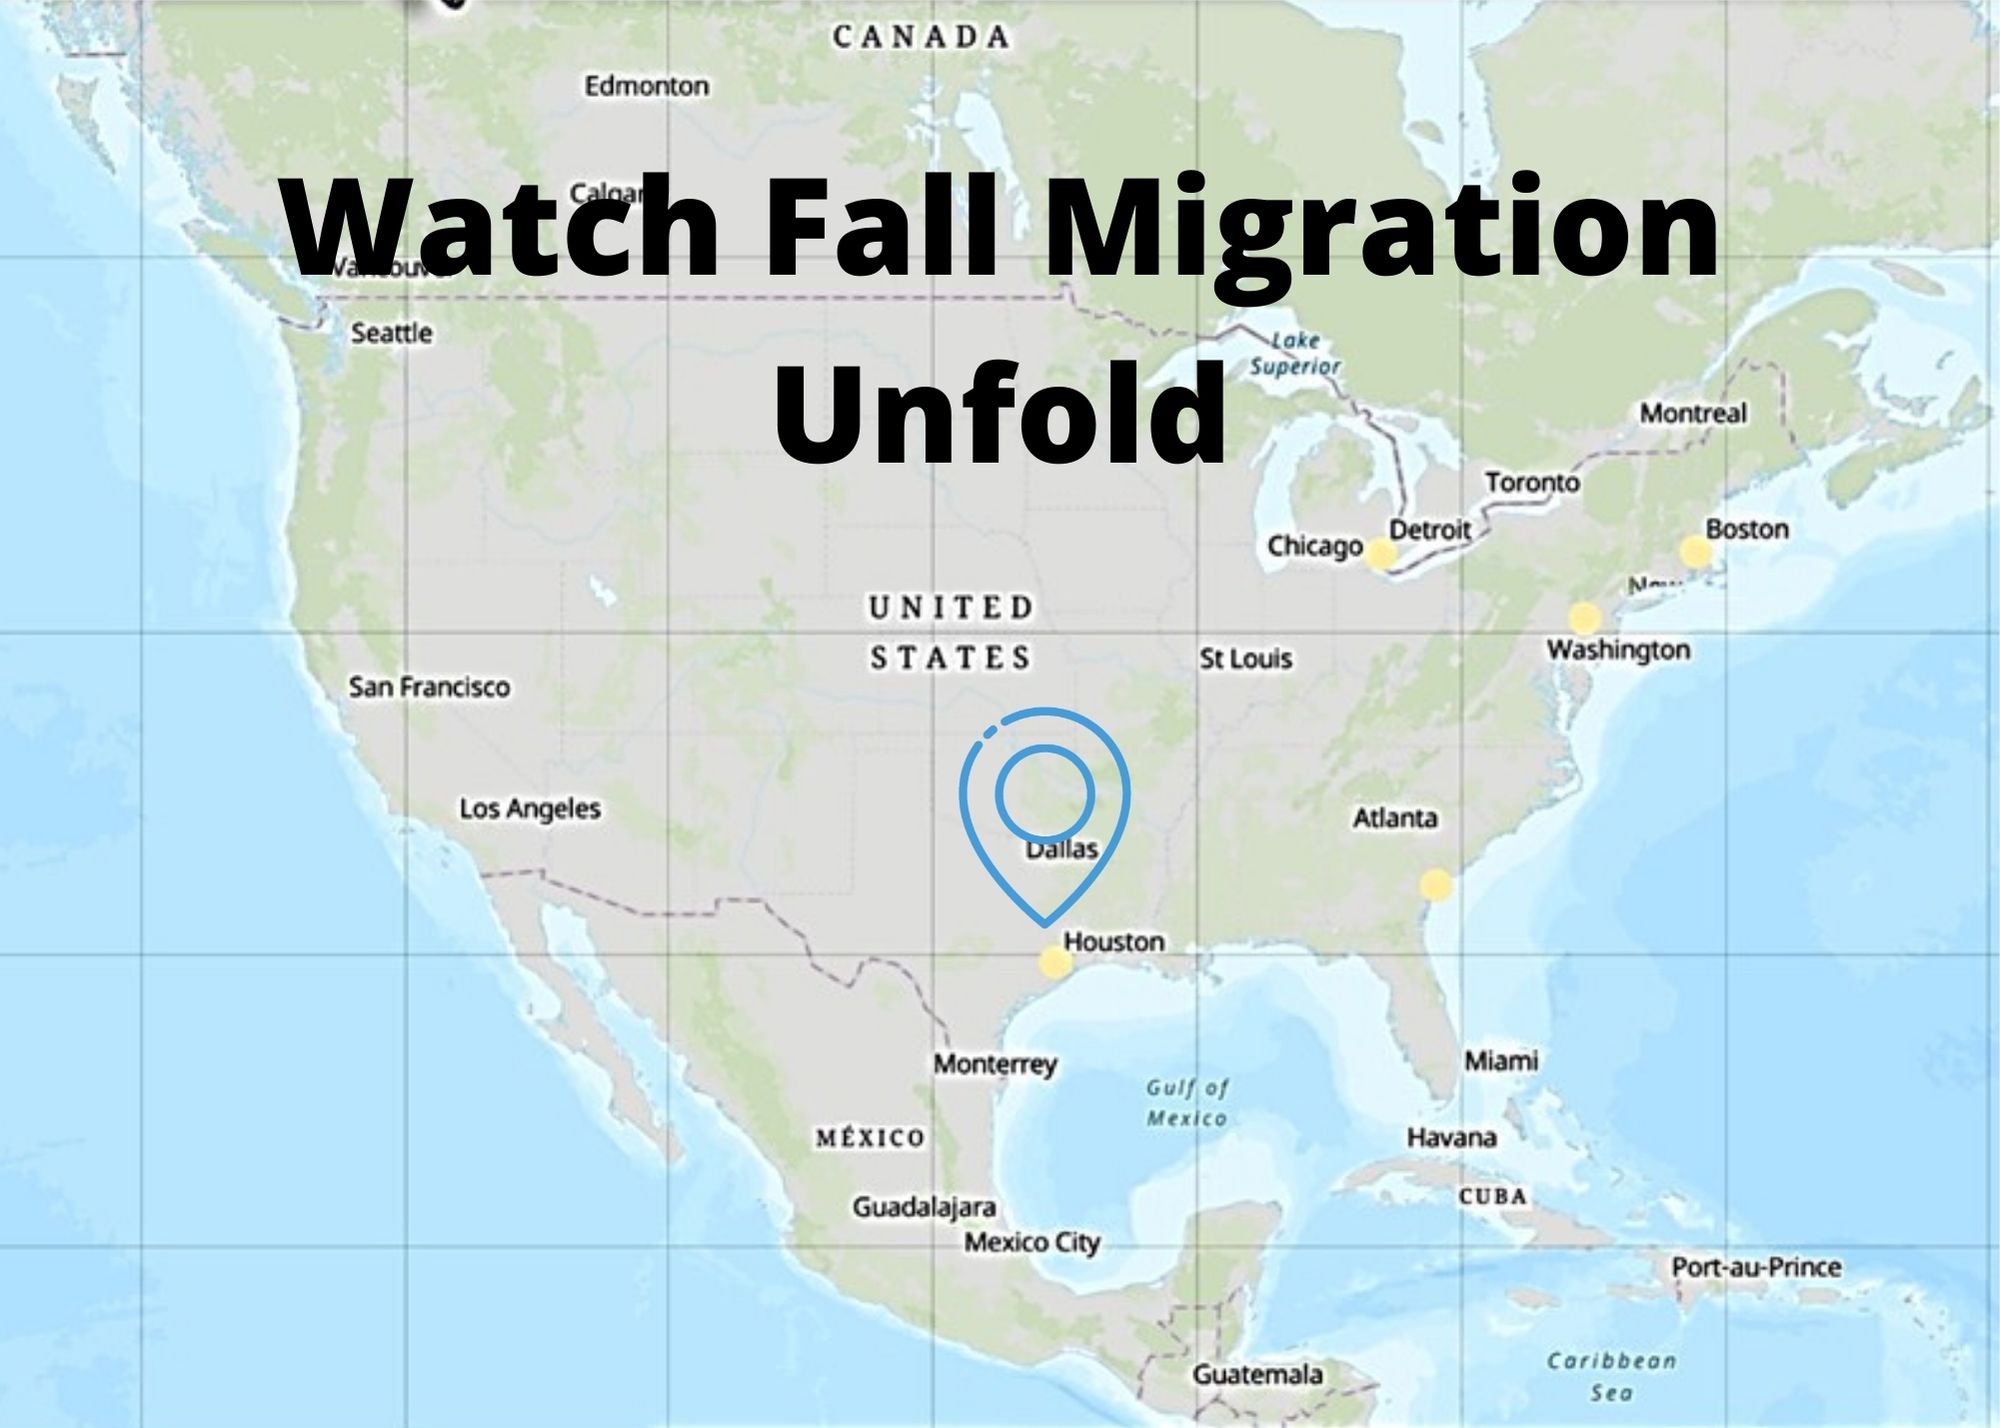 Watch the fall migration